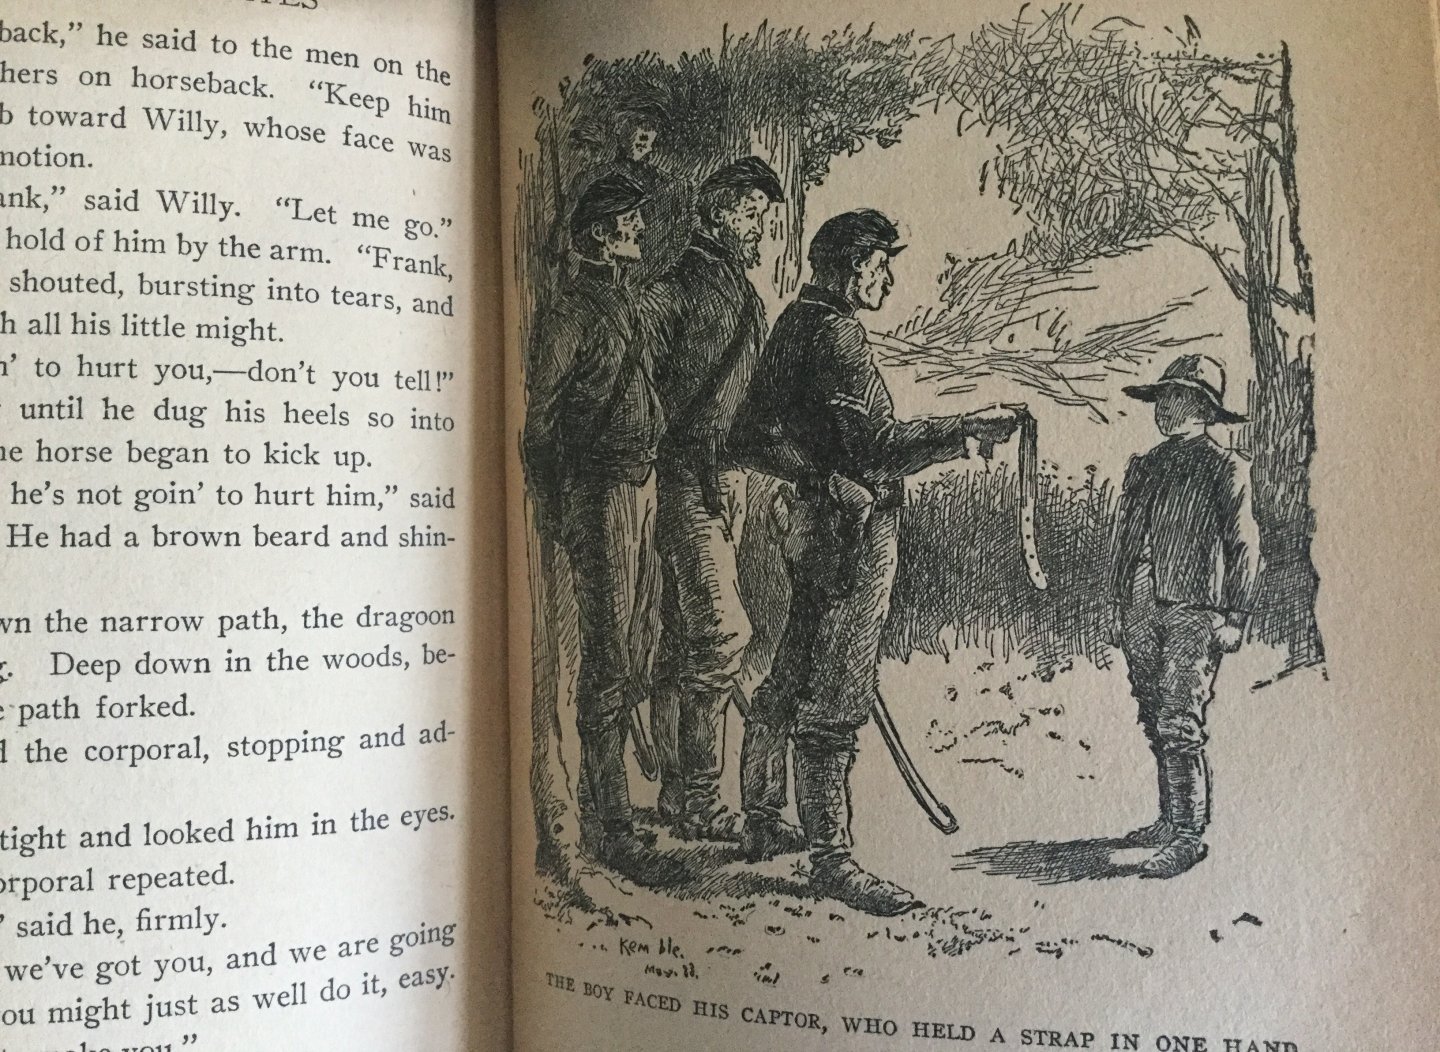 Page, Thomas Nelson - Two little confederates - a story about the American civil war seen through the eyes of two southern boys